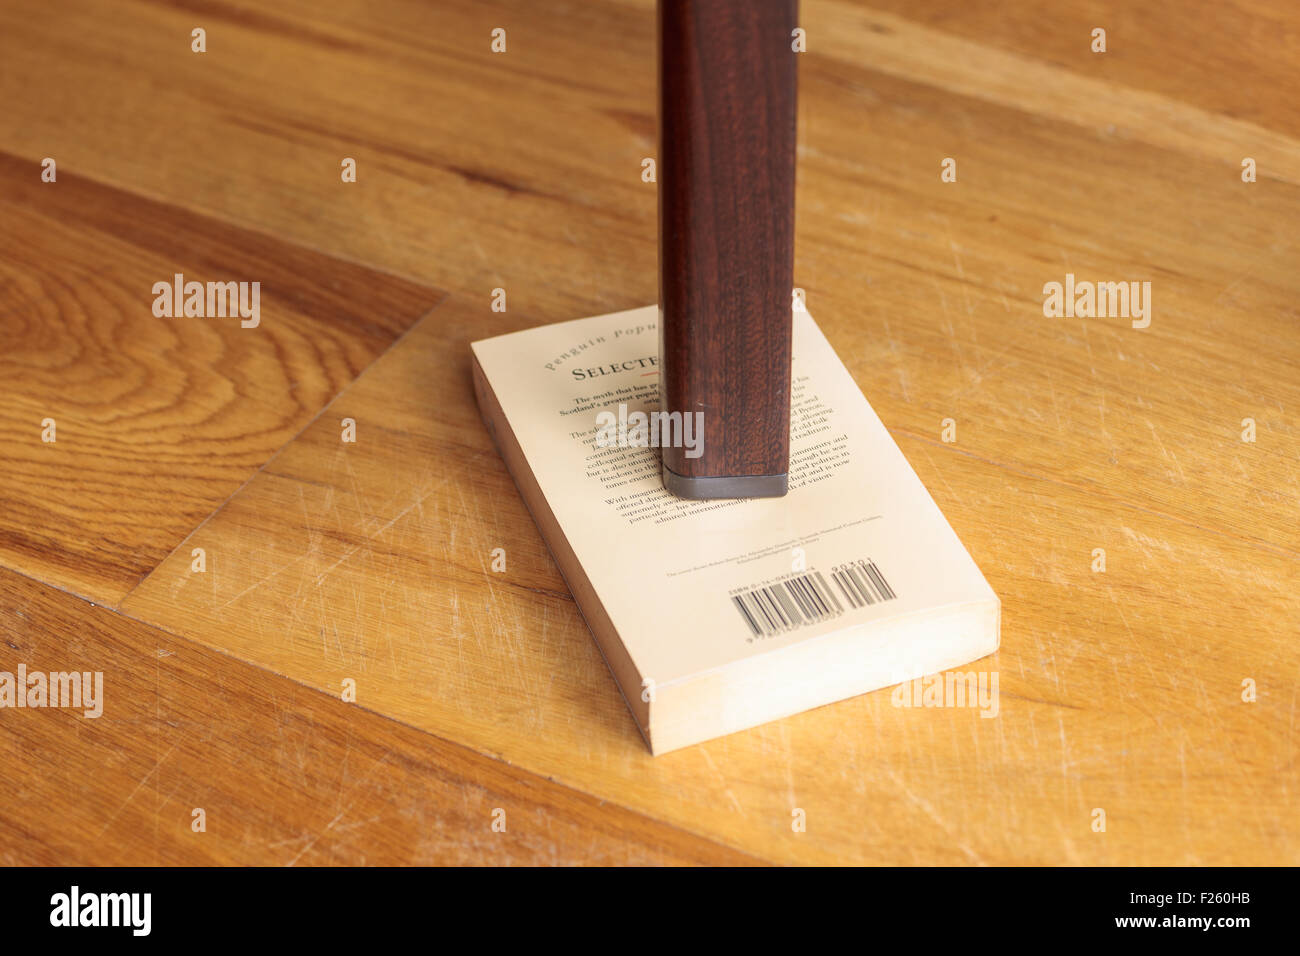 Leg of a wobbly table supported by a book Stock Photo